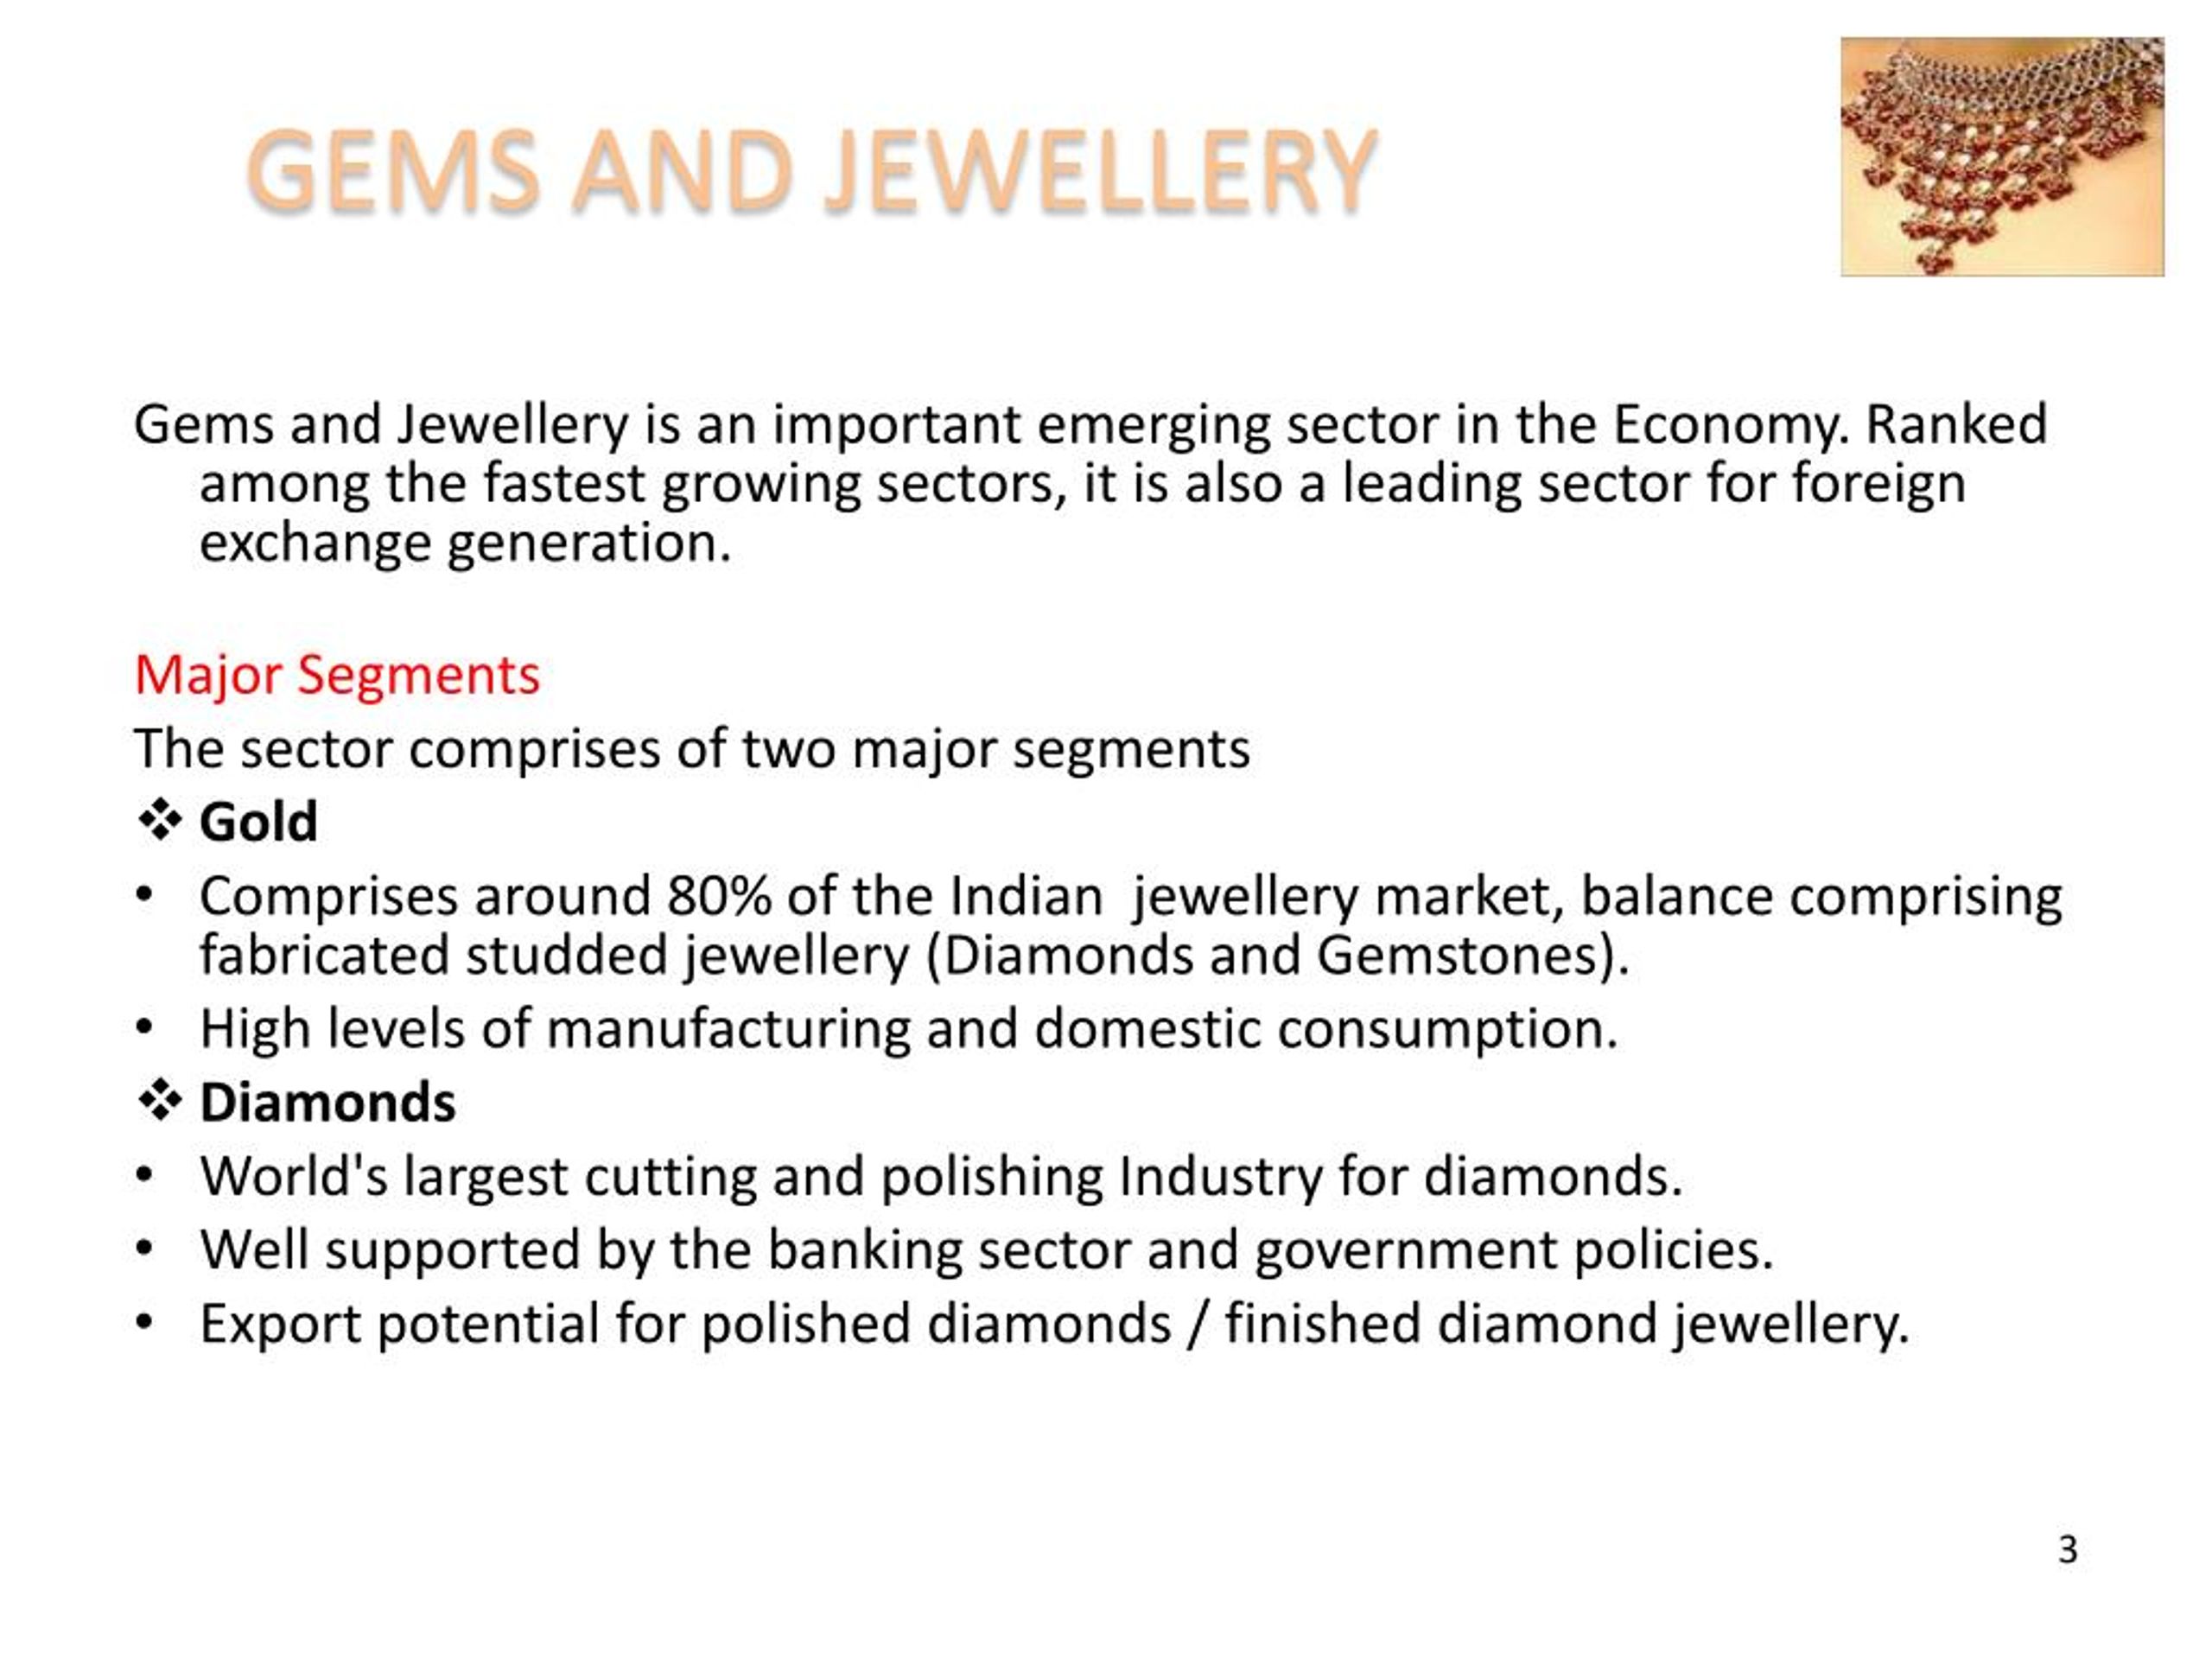 PPT - Gems and Jewellery Industry in India PowerPoint Presentation ...